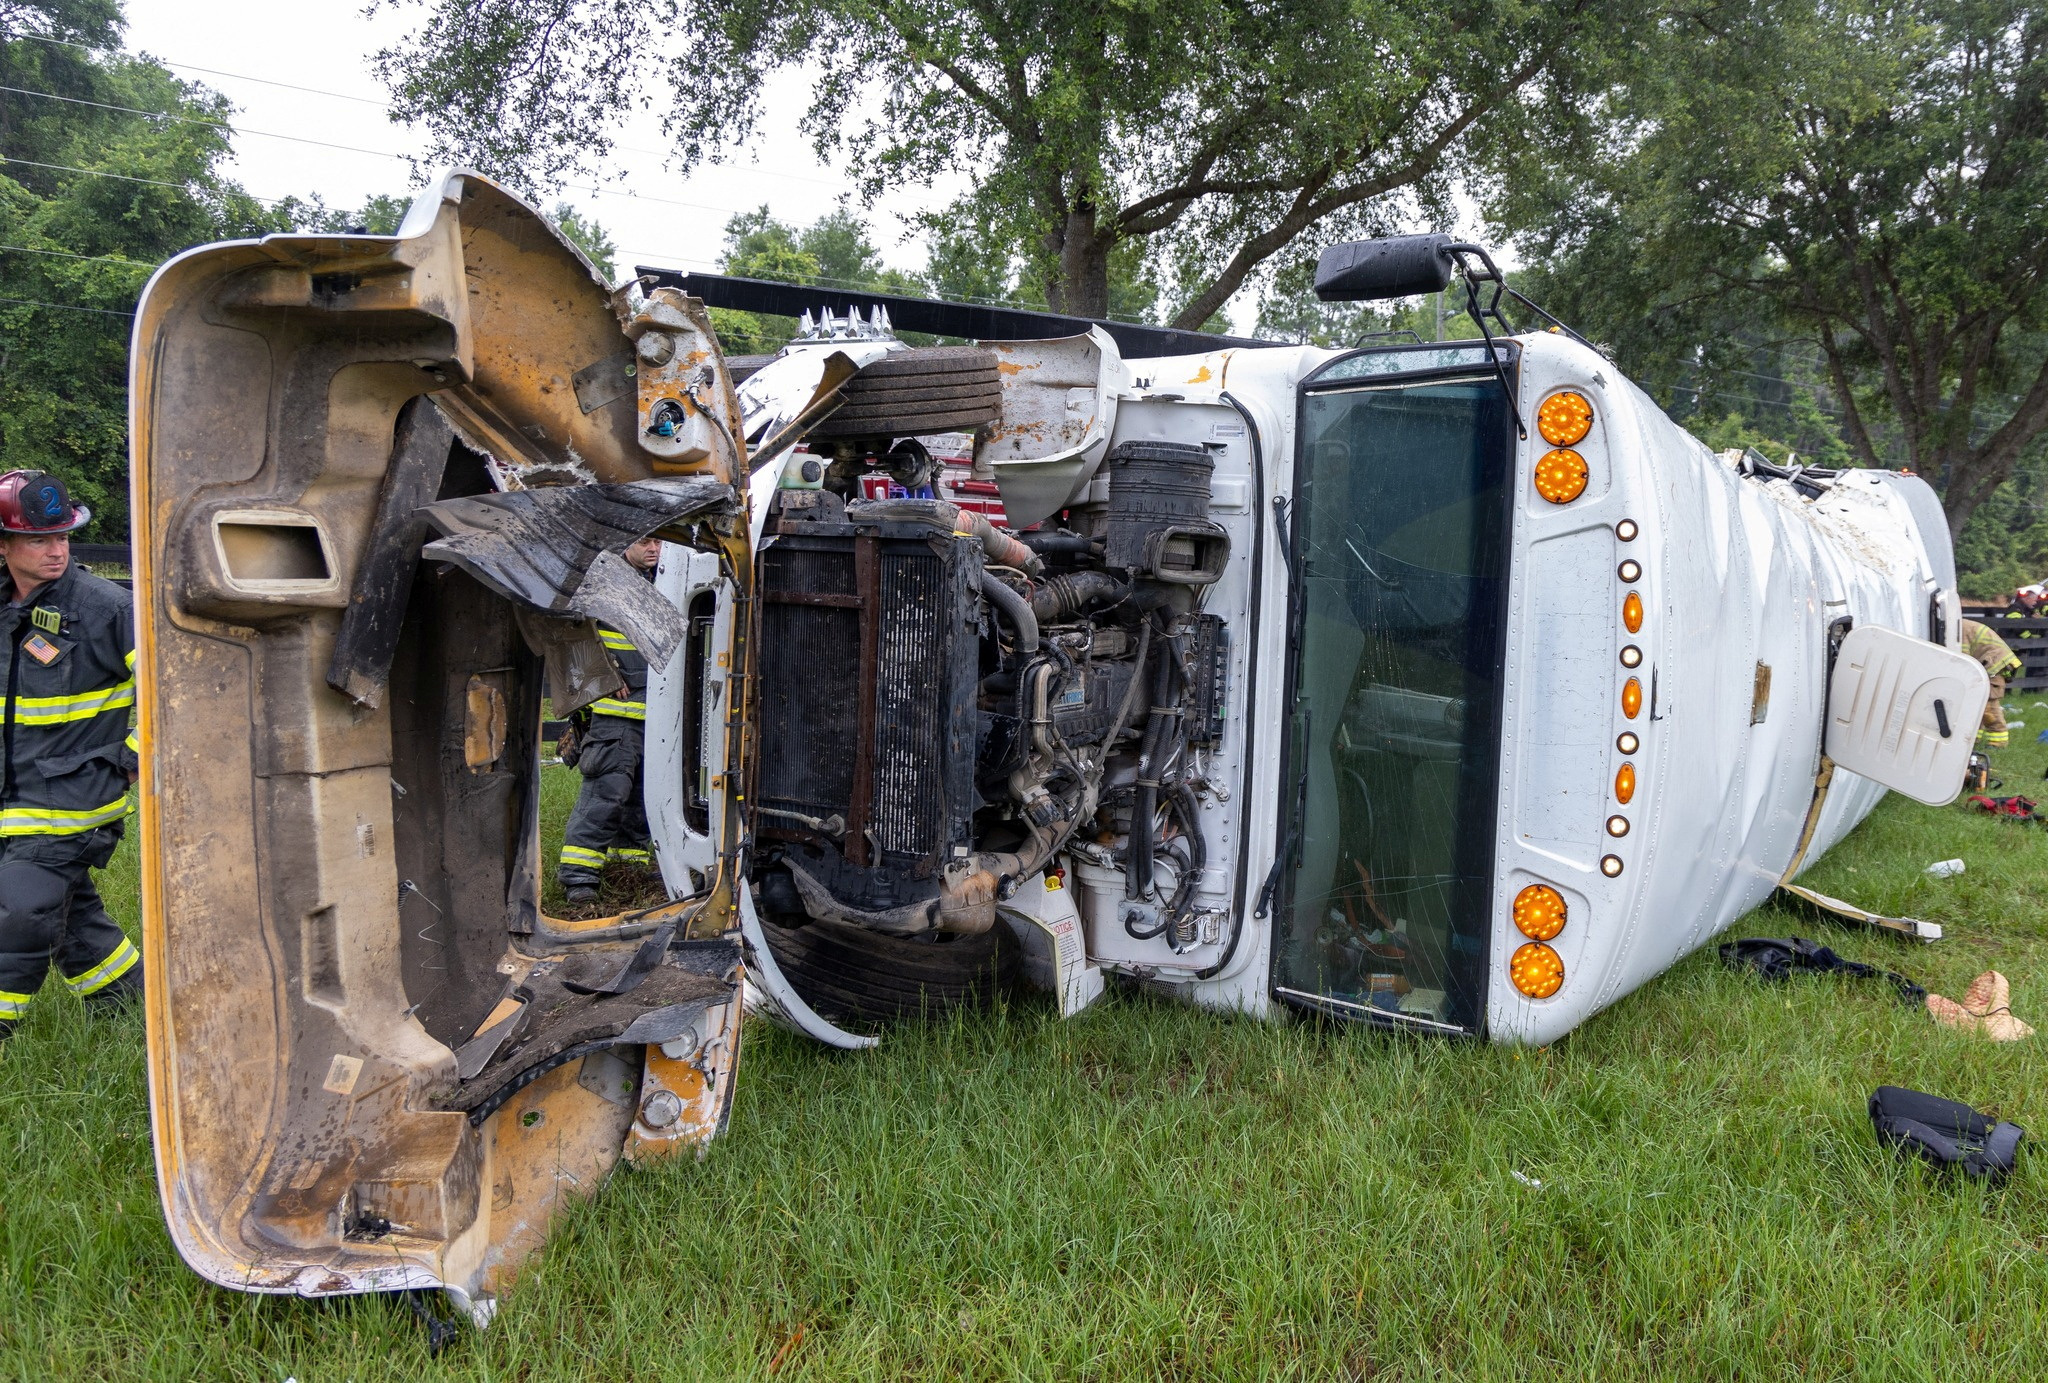 Tragic Collision Claims Lives of Farm Laborers in Northern Florida